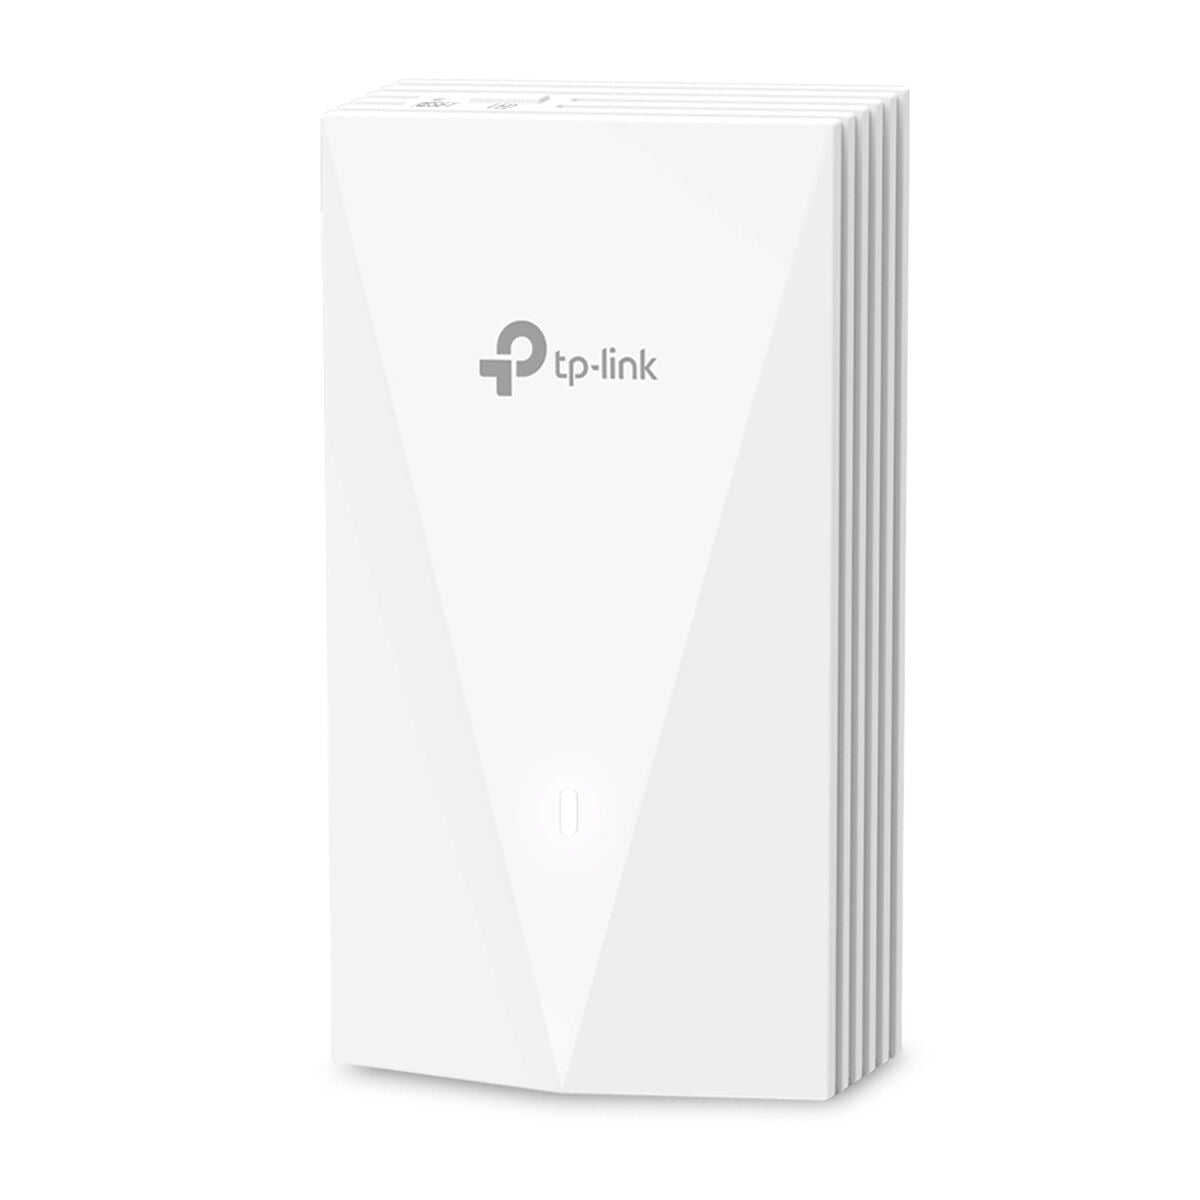 Access point TP-Link EAP655-WALL, TP-Link, Computing, Network devices, access-point-tp-link-eap655-wall, Brand_TP-Link, category-reference-2609, category-reference-2803, category-reference-2820, category-reference-t-19685, category-reference-t-19914, Condition_NEW, networks/wiring, Price_100 - 200, Teleworking, RiotNook